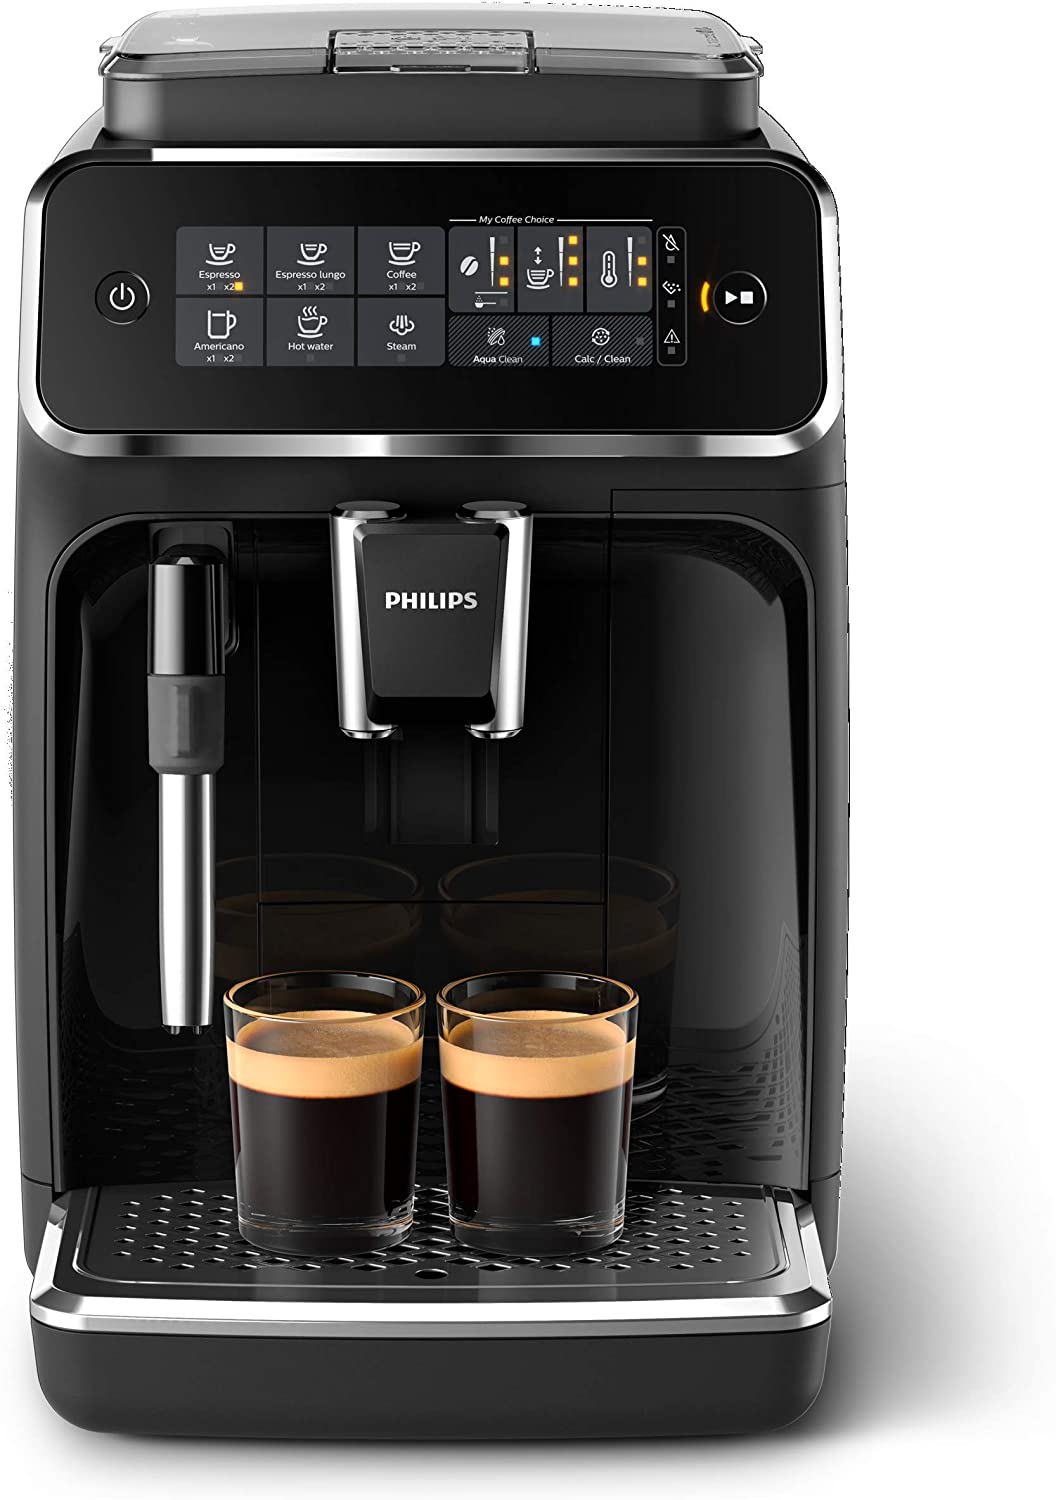 Philips 3200 Series Fully Automatic Espresso Machine w/ Milk Frother $497 @Amazon